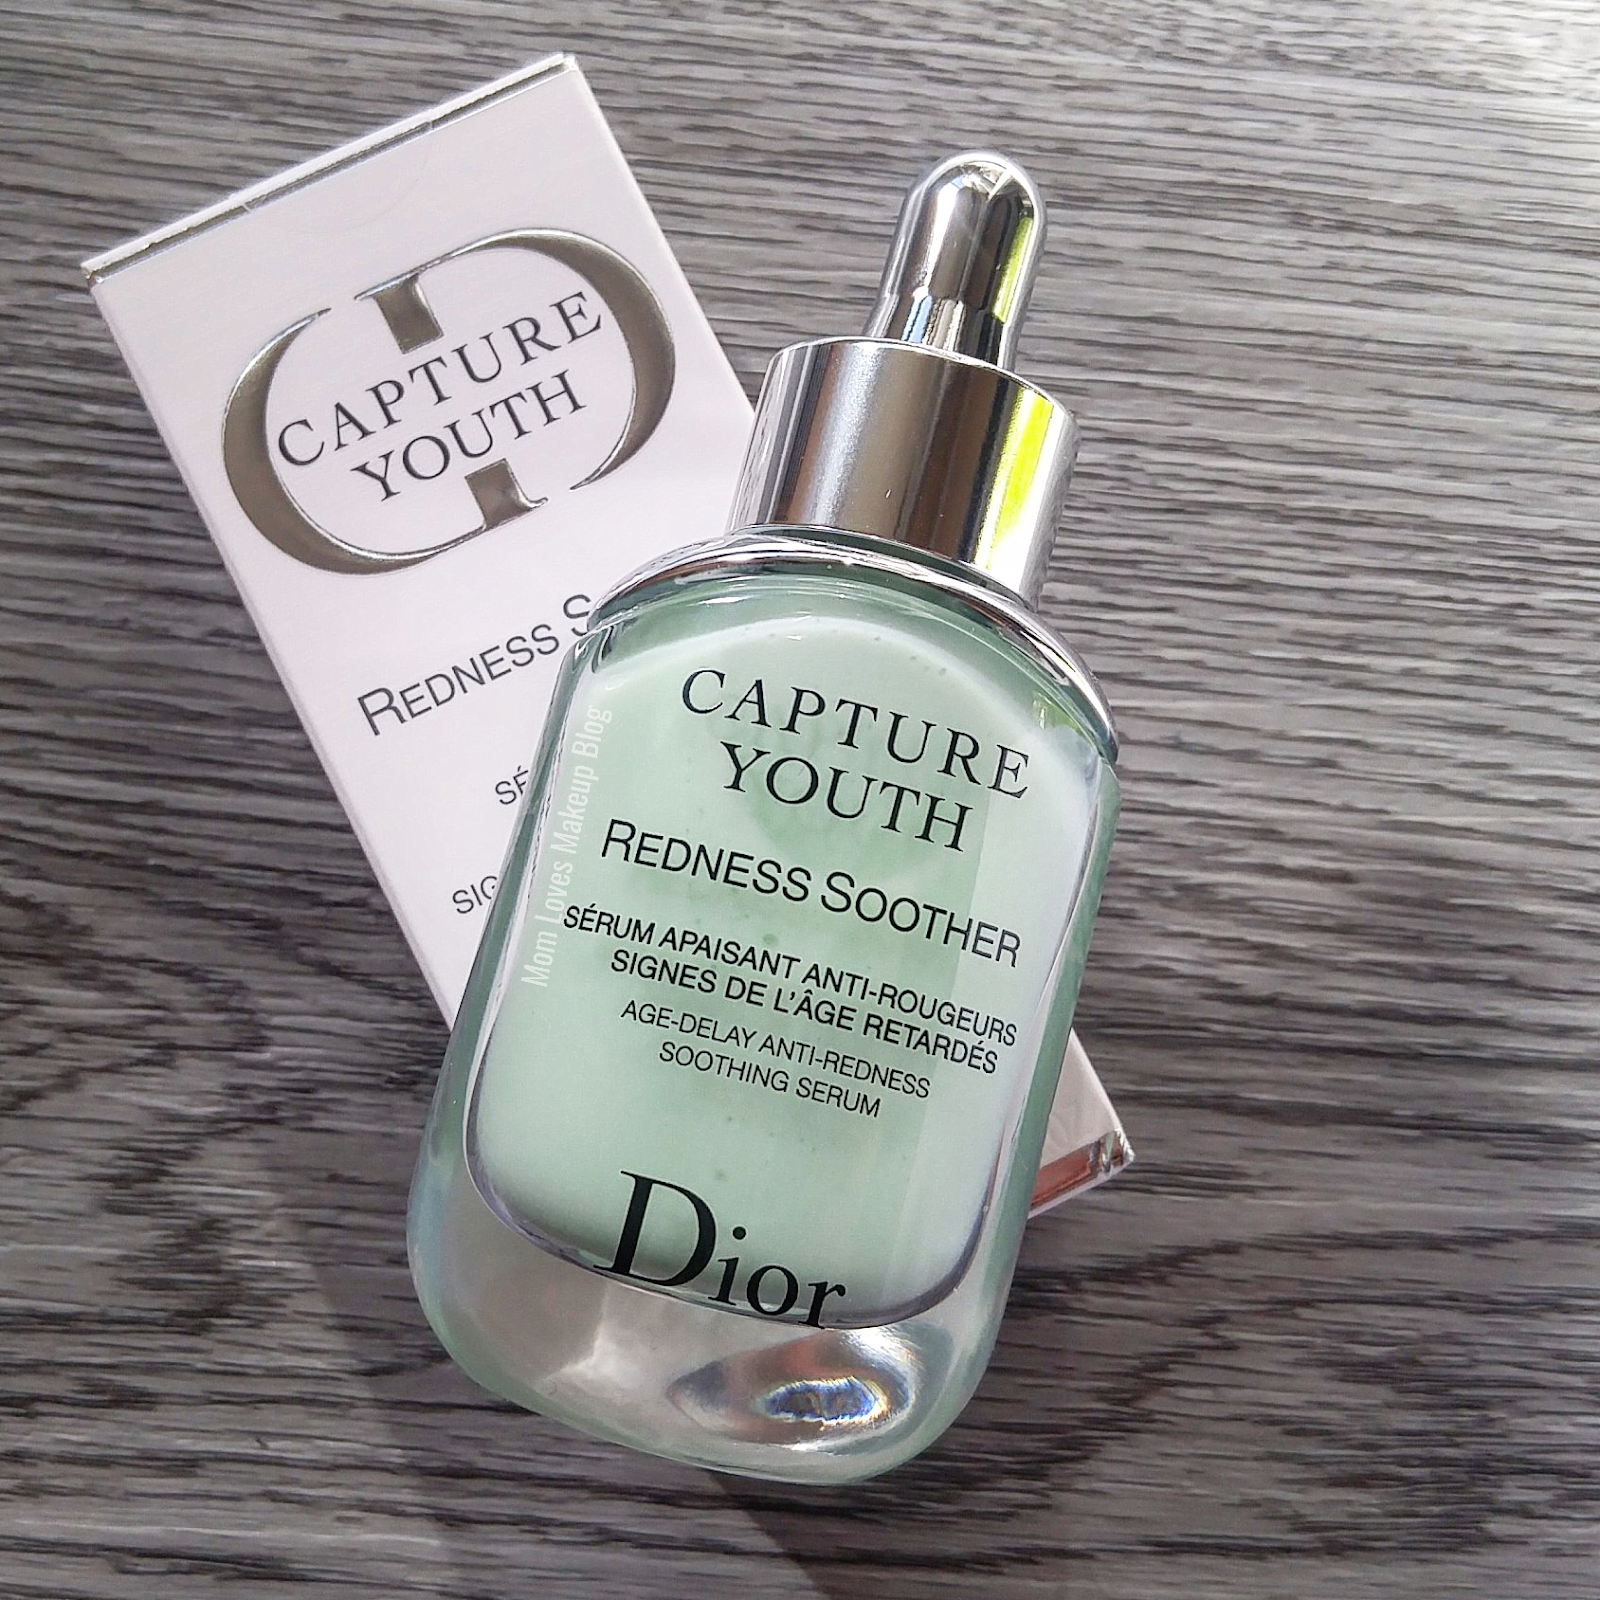 dior redness soother review